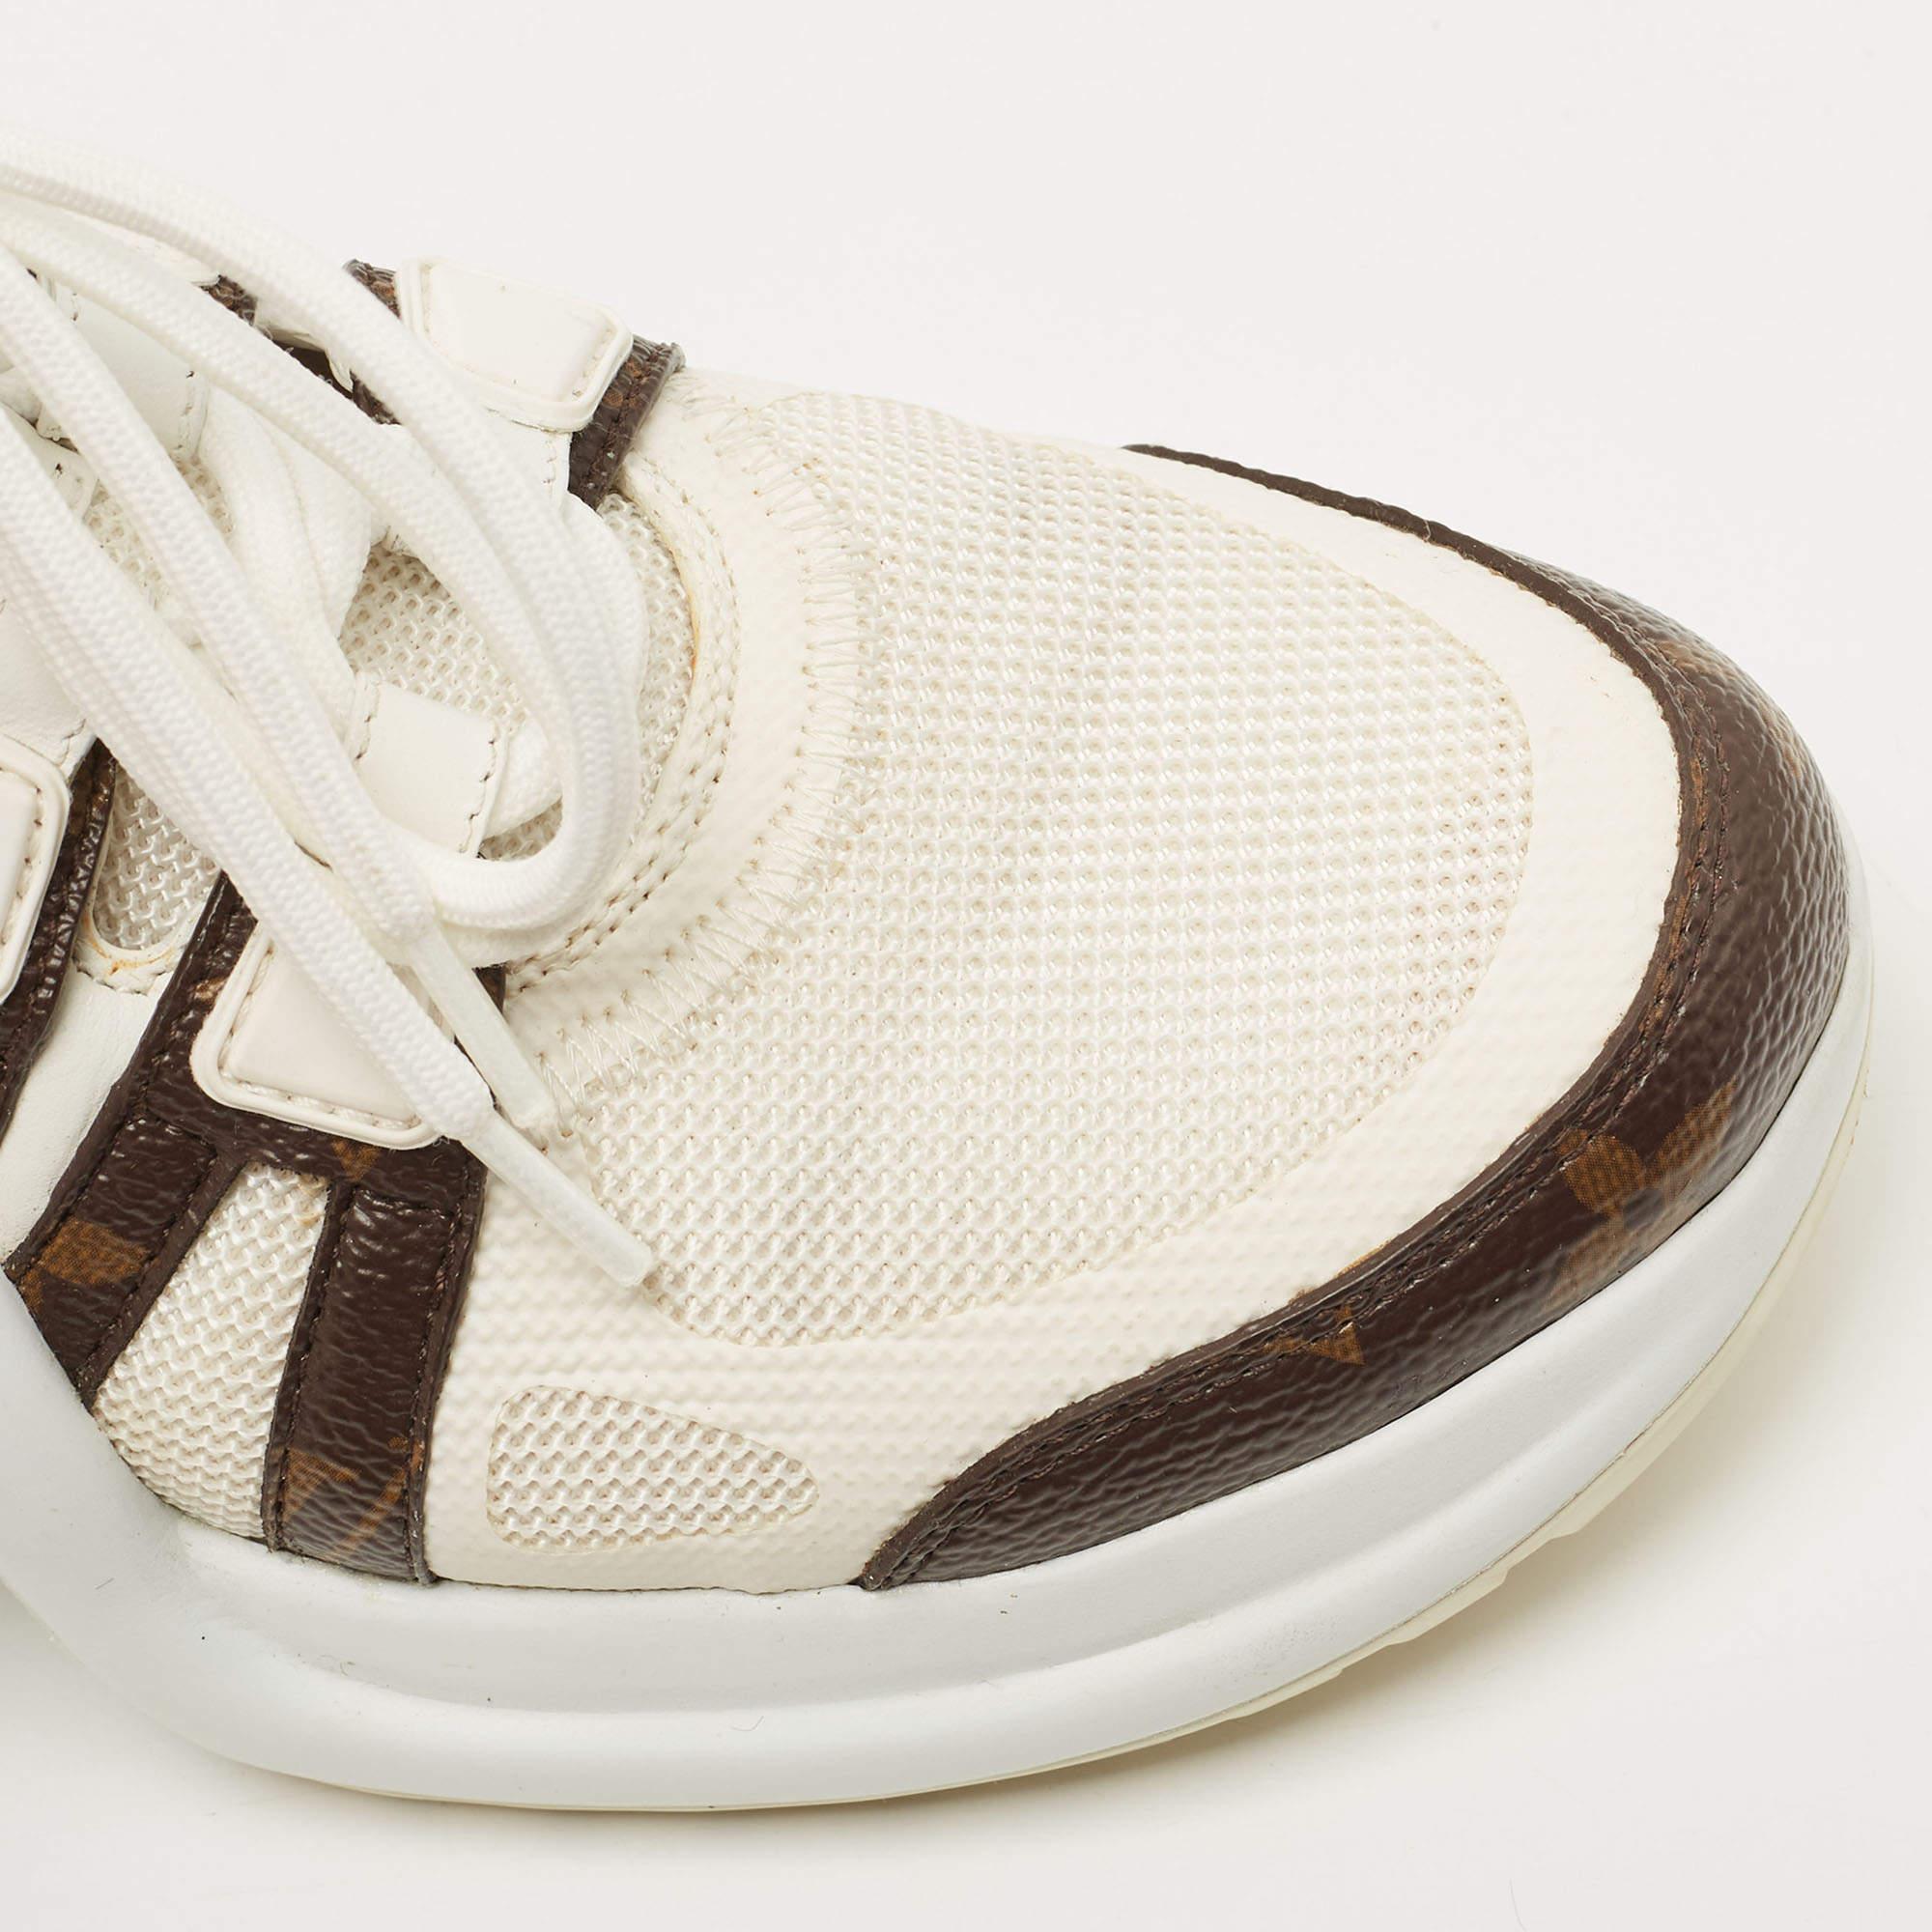 Louis Vuitton White/Monogram Canvas and Leather Archlight Sneakers Size 37 3